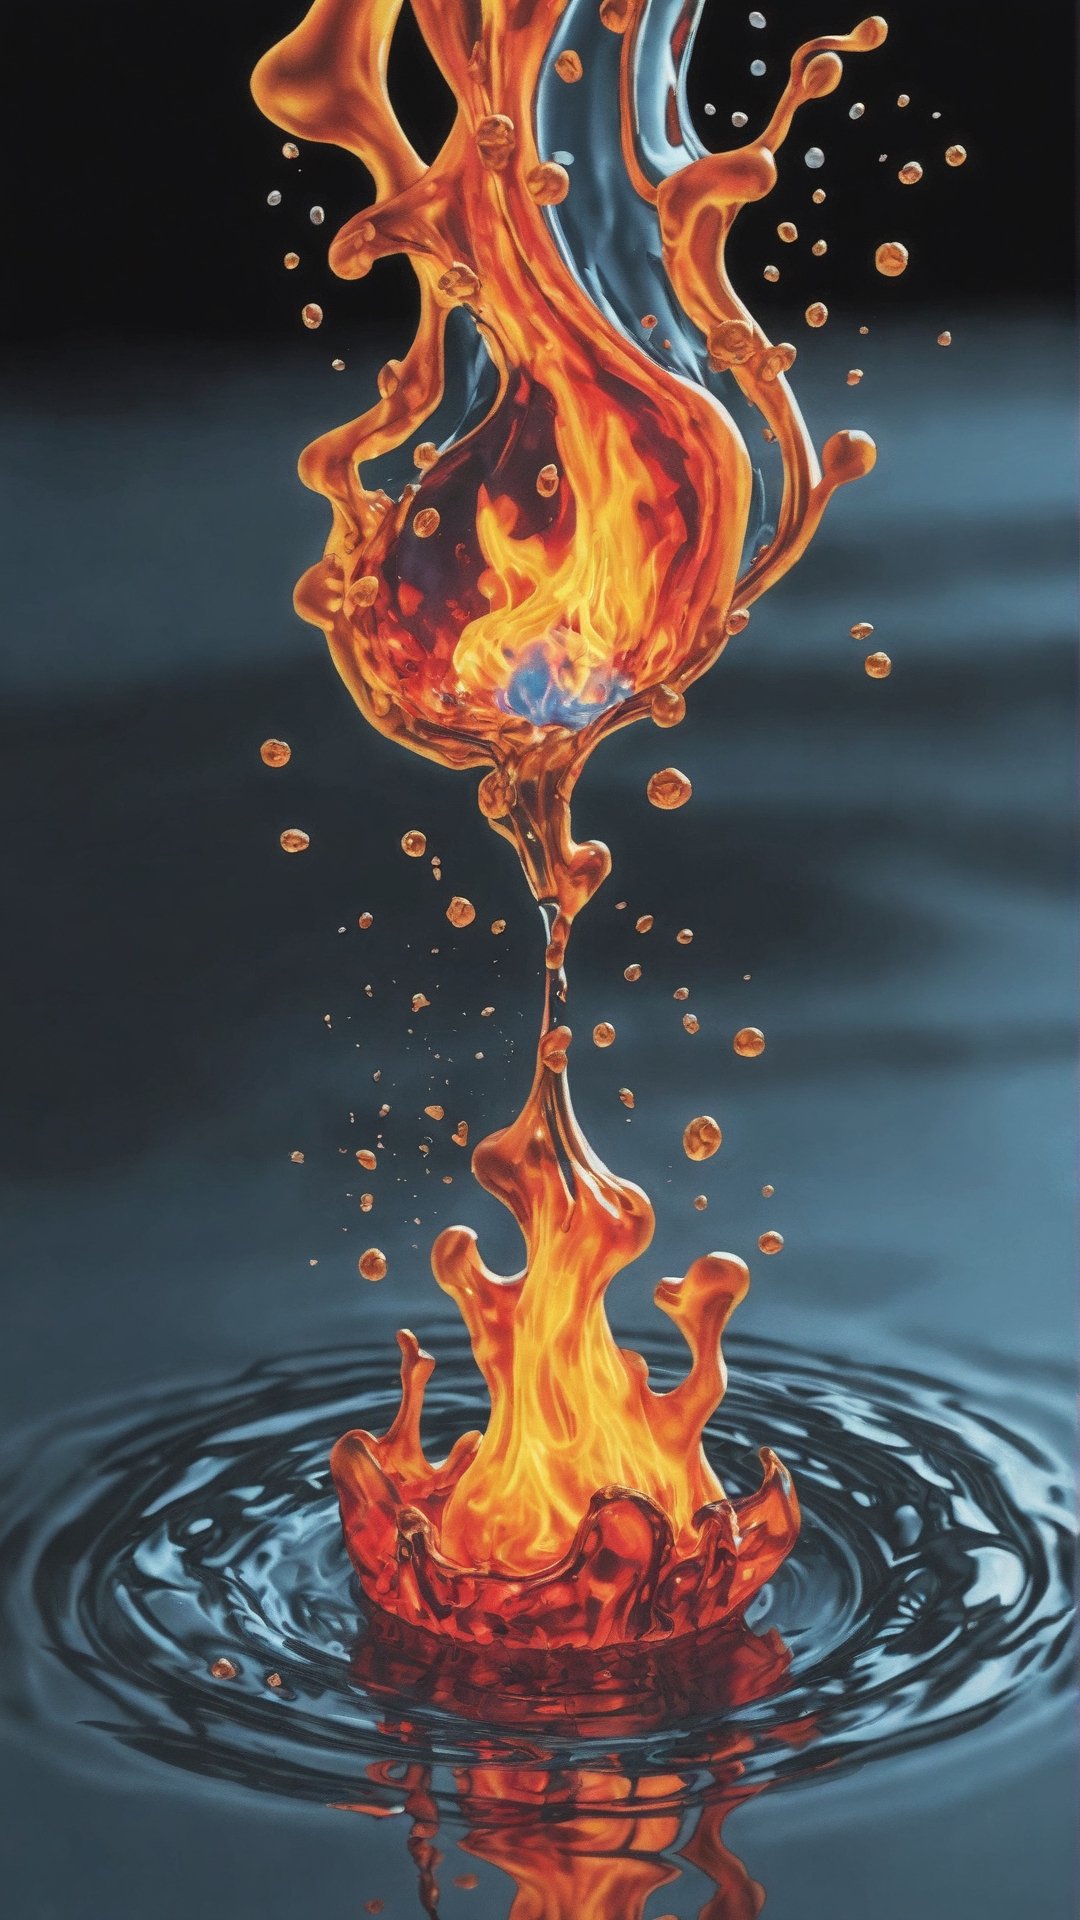 A new element, the perfect combination of water and fire, water that looks like fire, in a non-gravitational state